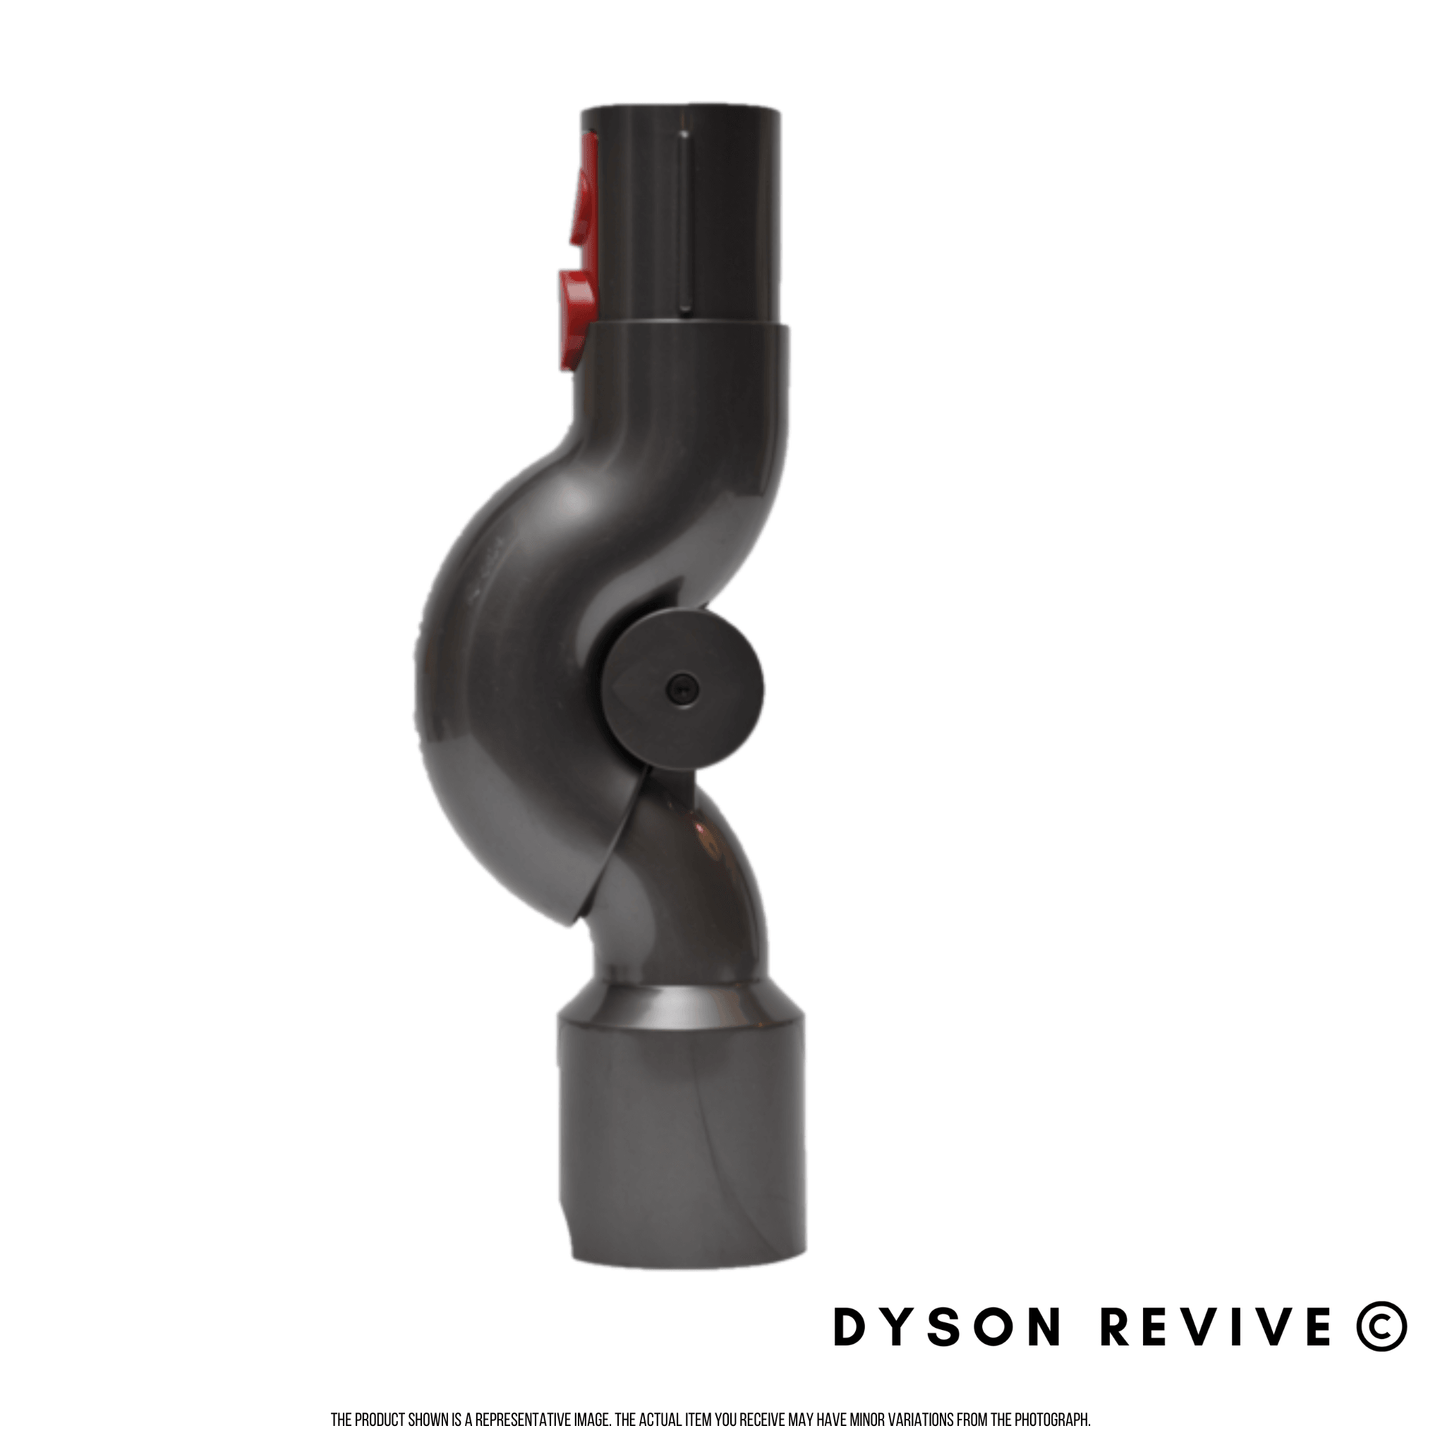 Genuine Refurbished Dyson Up Top Adaptor - Dyson Revive